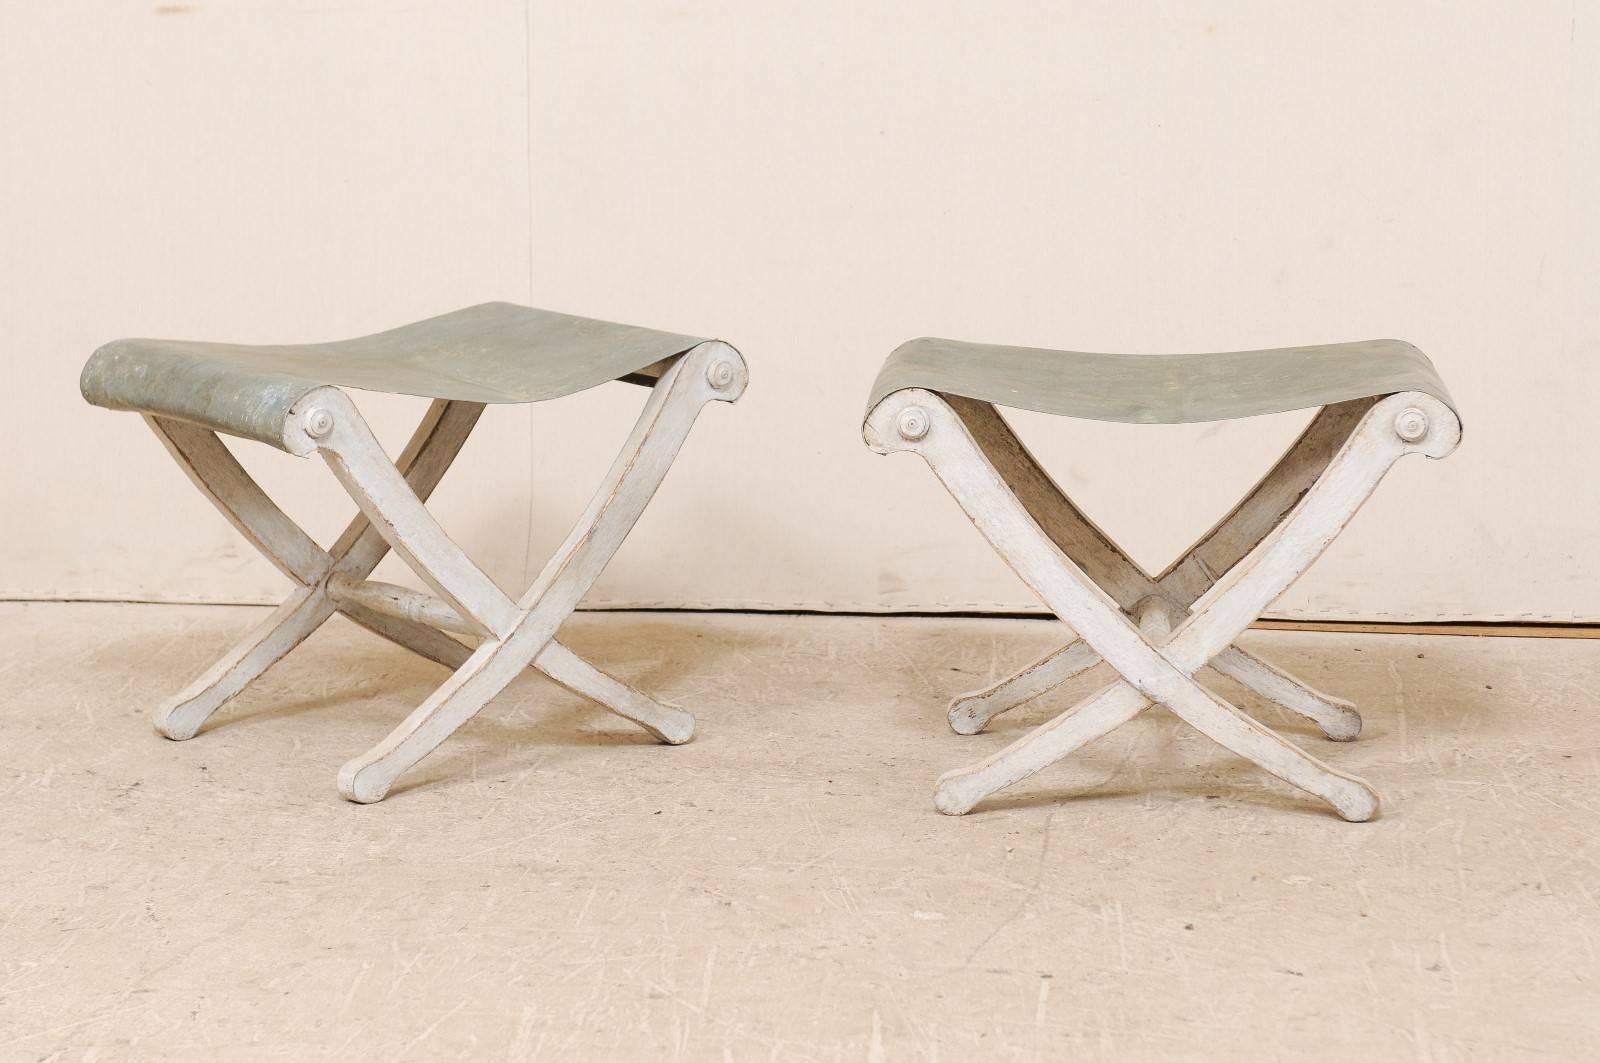 A pair of Italian carved wood stools with zinc seats. These vintage Italian stools feature whimsical zinc seats and carved wood bases with lightly swagging x-crossed legs at either side. The legs are simple with gently rolled feet and tops. The zinc